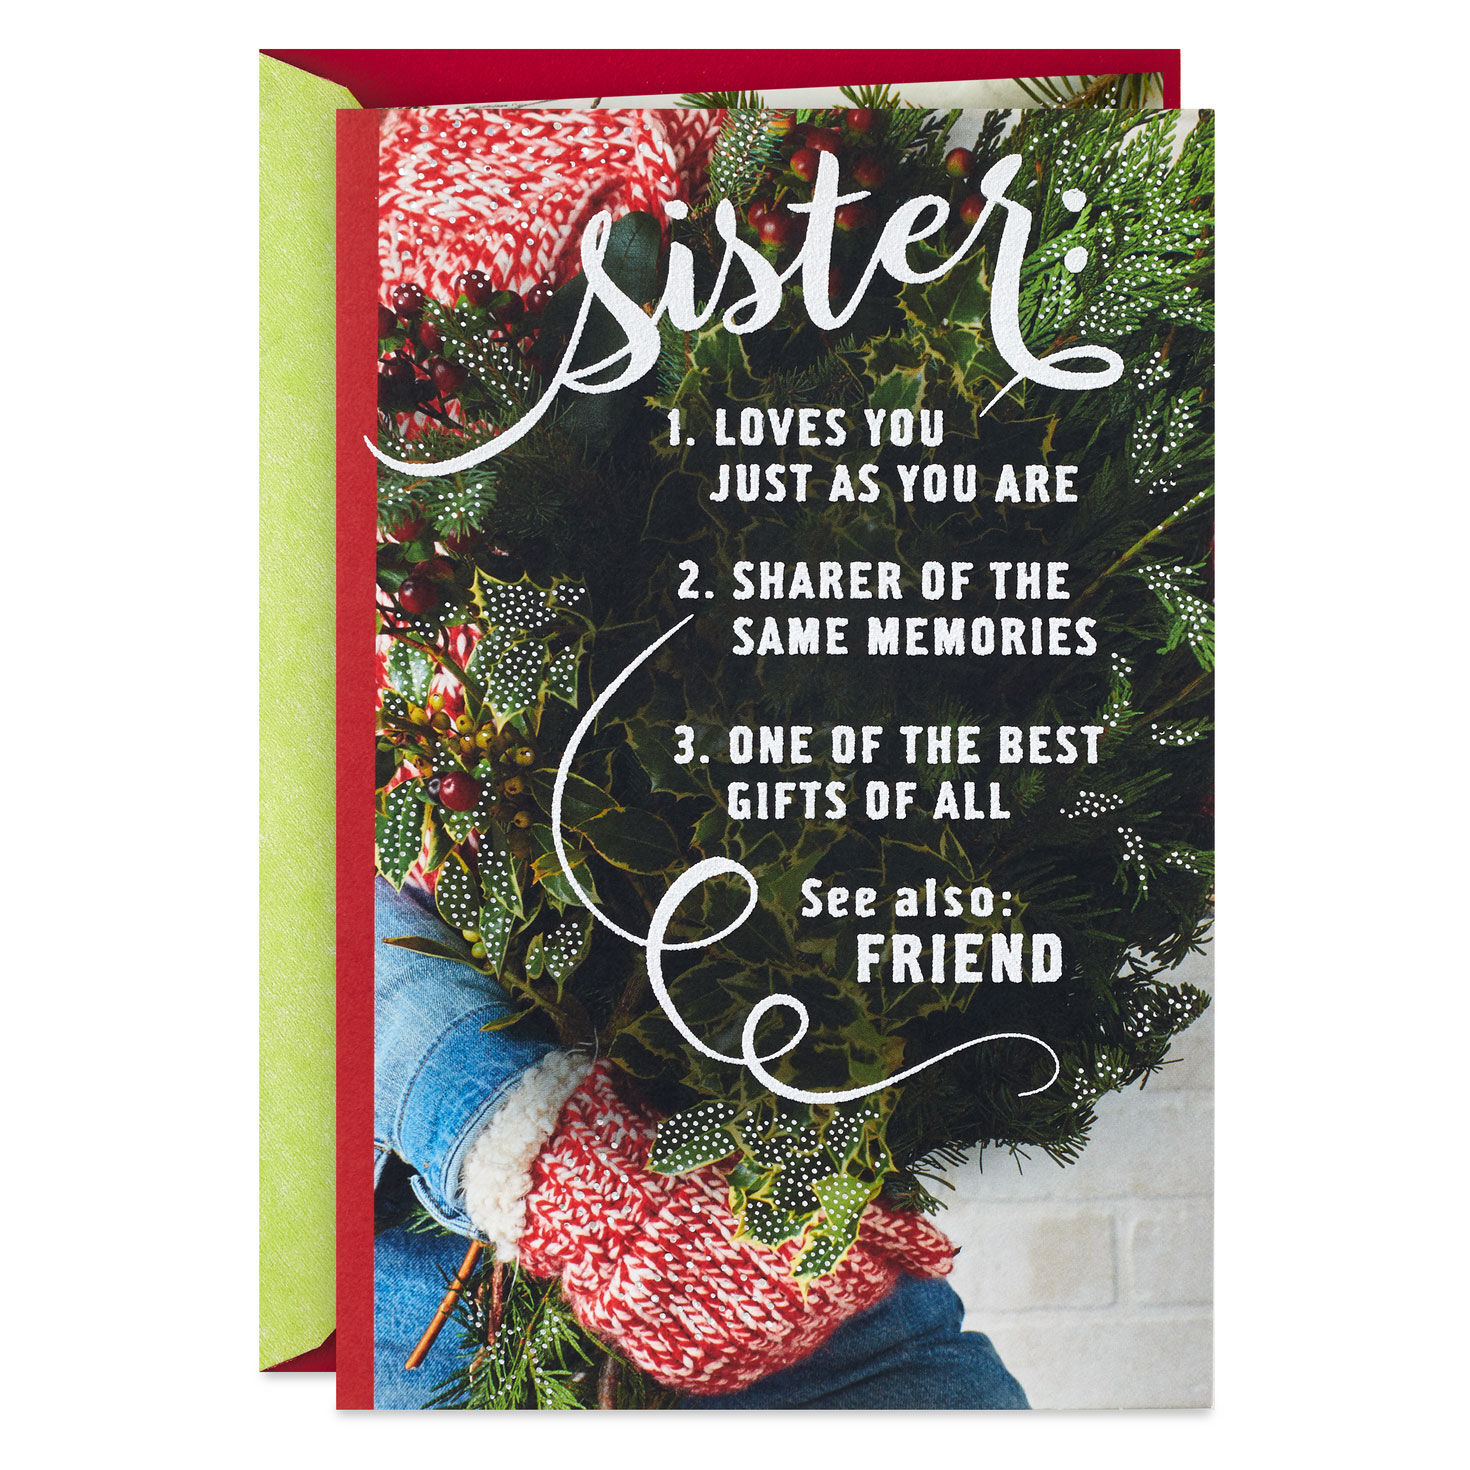 One of the Best Gifts of All Christmas Card for Sister for only USD 4.59 | Hallmark